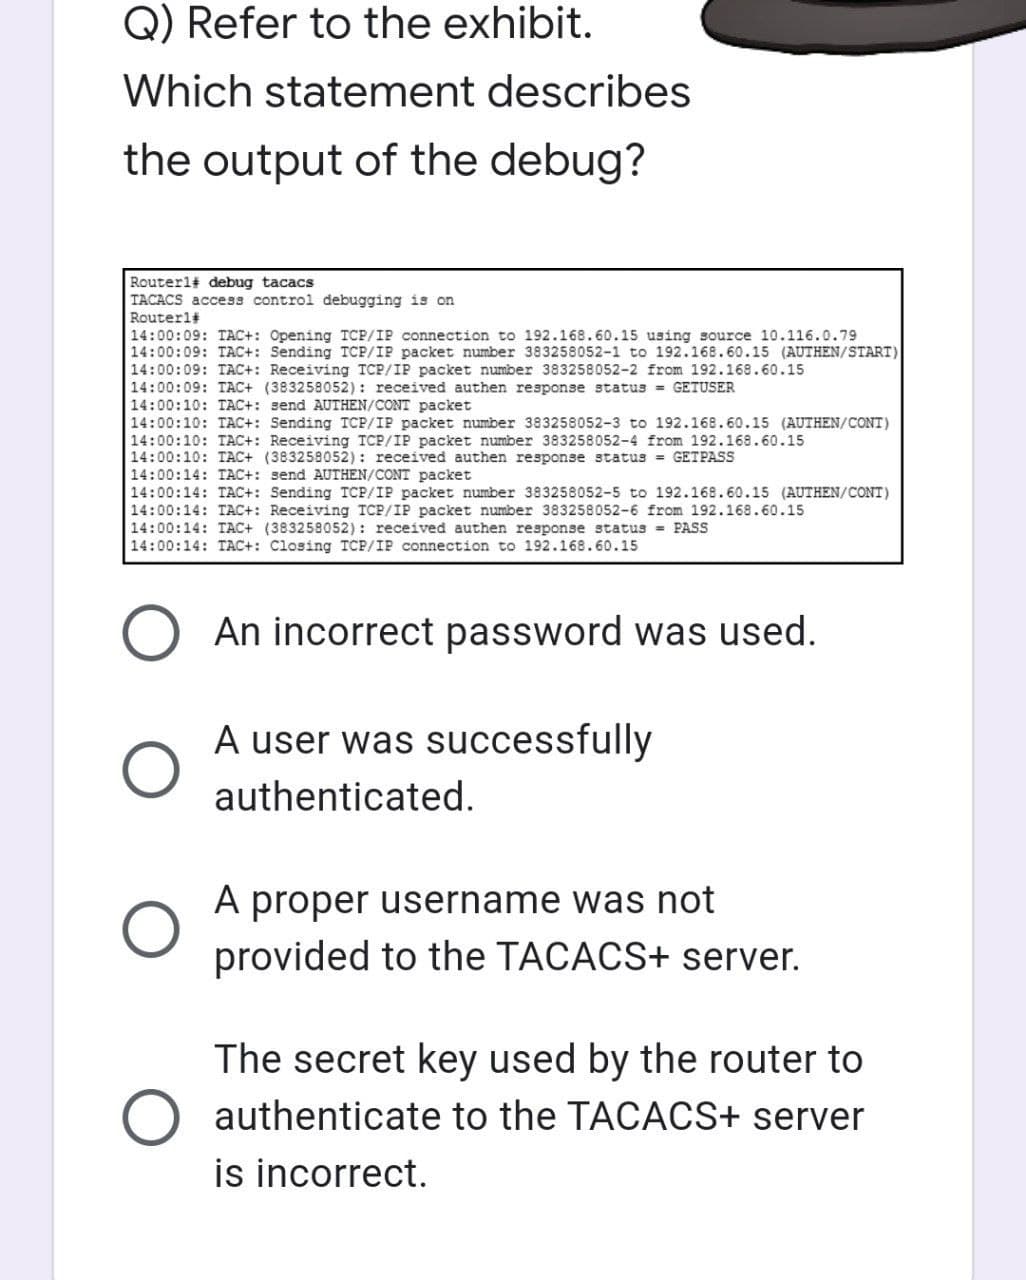 Q) Refer to the exhibit.
Which statement describes
the output of the debug?
Routerl# debug tacacs
TACACS access control debugging is on
Router1#
14:00:09: TAC+: Opening TCP/IP connection to 192.168.60.15 using source 10.116.0.79
14:00:09: TAC+: Sending TCP/IP packet number 383258052-1 to 192.168.60.15 (AUTHEN/START)
14:00:09: TAC+: Receiving TCP/IP packet number 383258052-2 from 192.168.60.15
14:00:09: TAC+ (383258052): received authen response status = GETUSER
14:00:10: TAC+: send AUTHEN/CONT packet
14:00:10: TAC+: Sending TCP/IP packet number 383258052-3 to 192.168.60.15 (AUTHEN/CONT)
14:00:10: TAC+: Receiving TCP/IP packet number 383258052-4 from 192.168.60.15
14:00:10: TAC+ (383258052): received authen response status = GET PASS
14:00:14: TAC+: send AUTHEN/CONT packet
14:00:14: TAC+: Sending TCP/IP packet number 383258052-5 to 192.168.60.15 (AUTHEN/CONT)
14:00:14: TAC+: Receiving TCP/IP packet number 383258052-6 from 192.168.60.15
14:00:14: TAC+ (383258052): received authen response status = PASS
14:00:14: TAC+: Closing TCP/IP connection to 192.168.60.15
O An incorrect password was used.
O
A user was successfully
authenticated.
A proper username was not
provided to the TACACS+ server.
The secret key used by the router to
authenticate to the TACACS+ server
is incorrect.
O